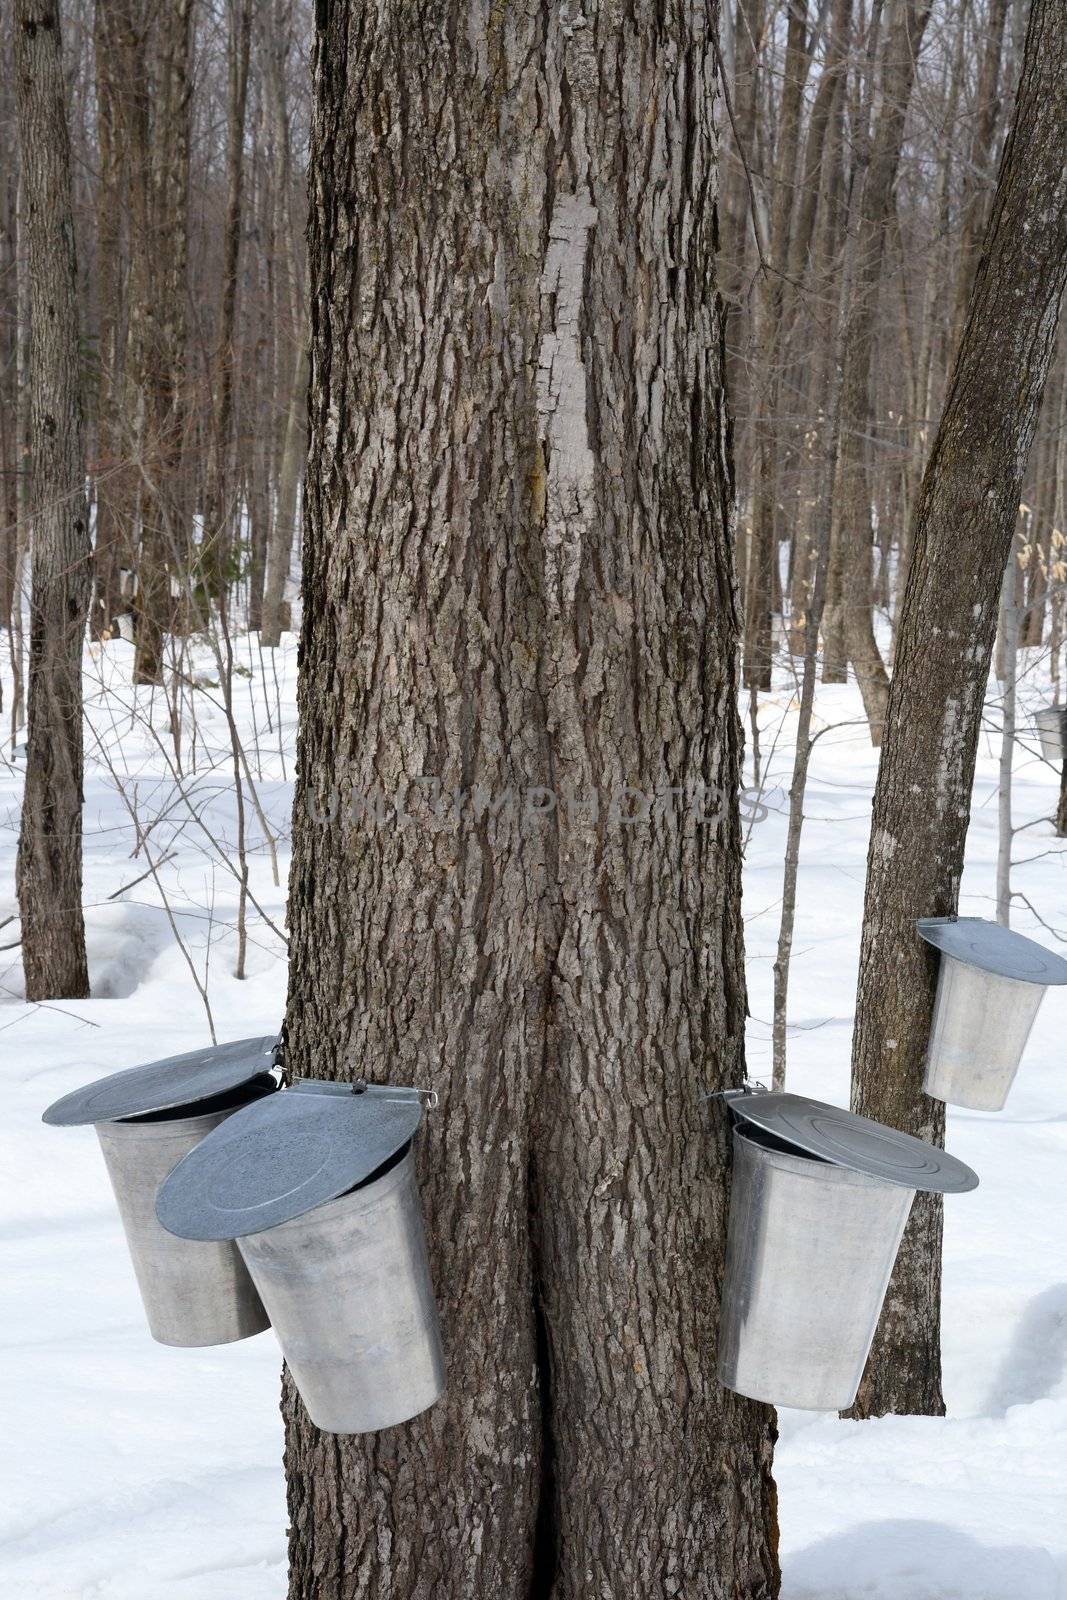 Maple syrup production, springtime. Pails for collecting maple sap.